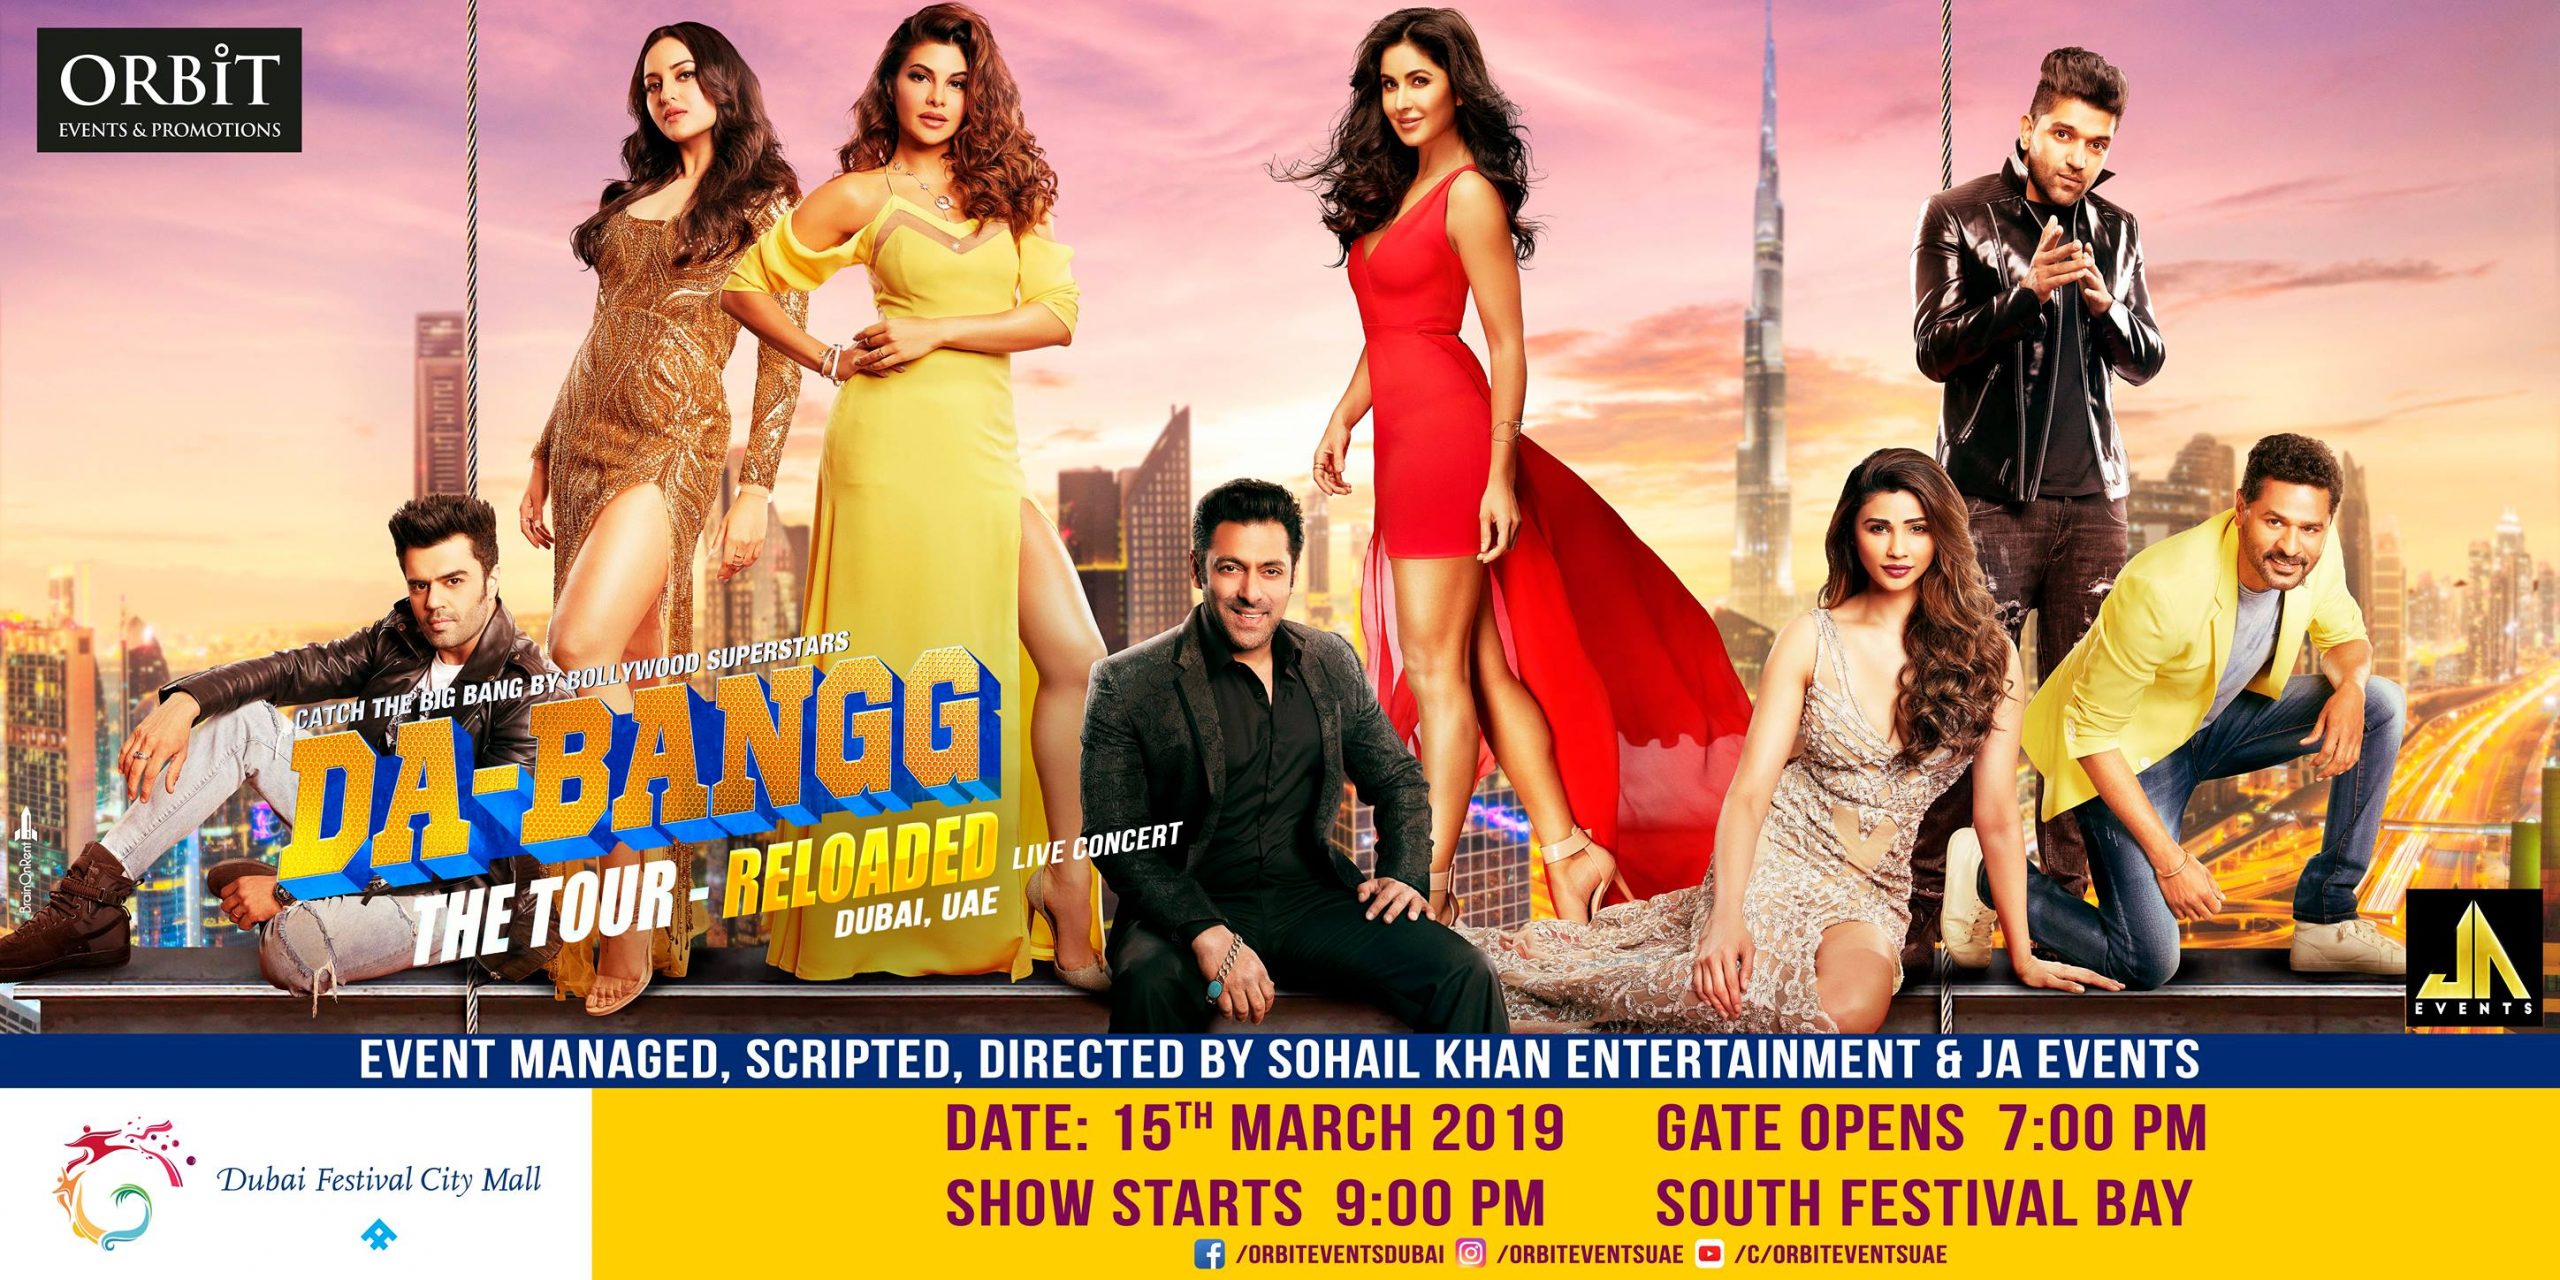 Dabangg The Tour Reloaded Live Concert In Dubai Coming Soon In Uae